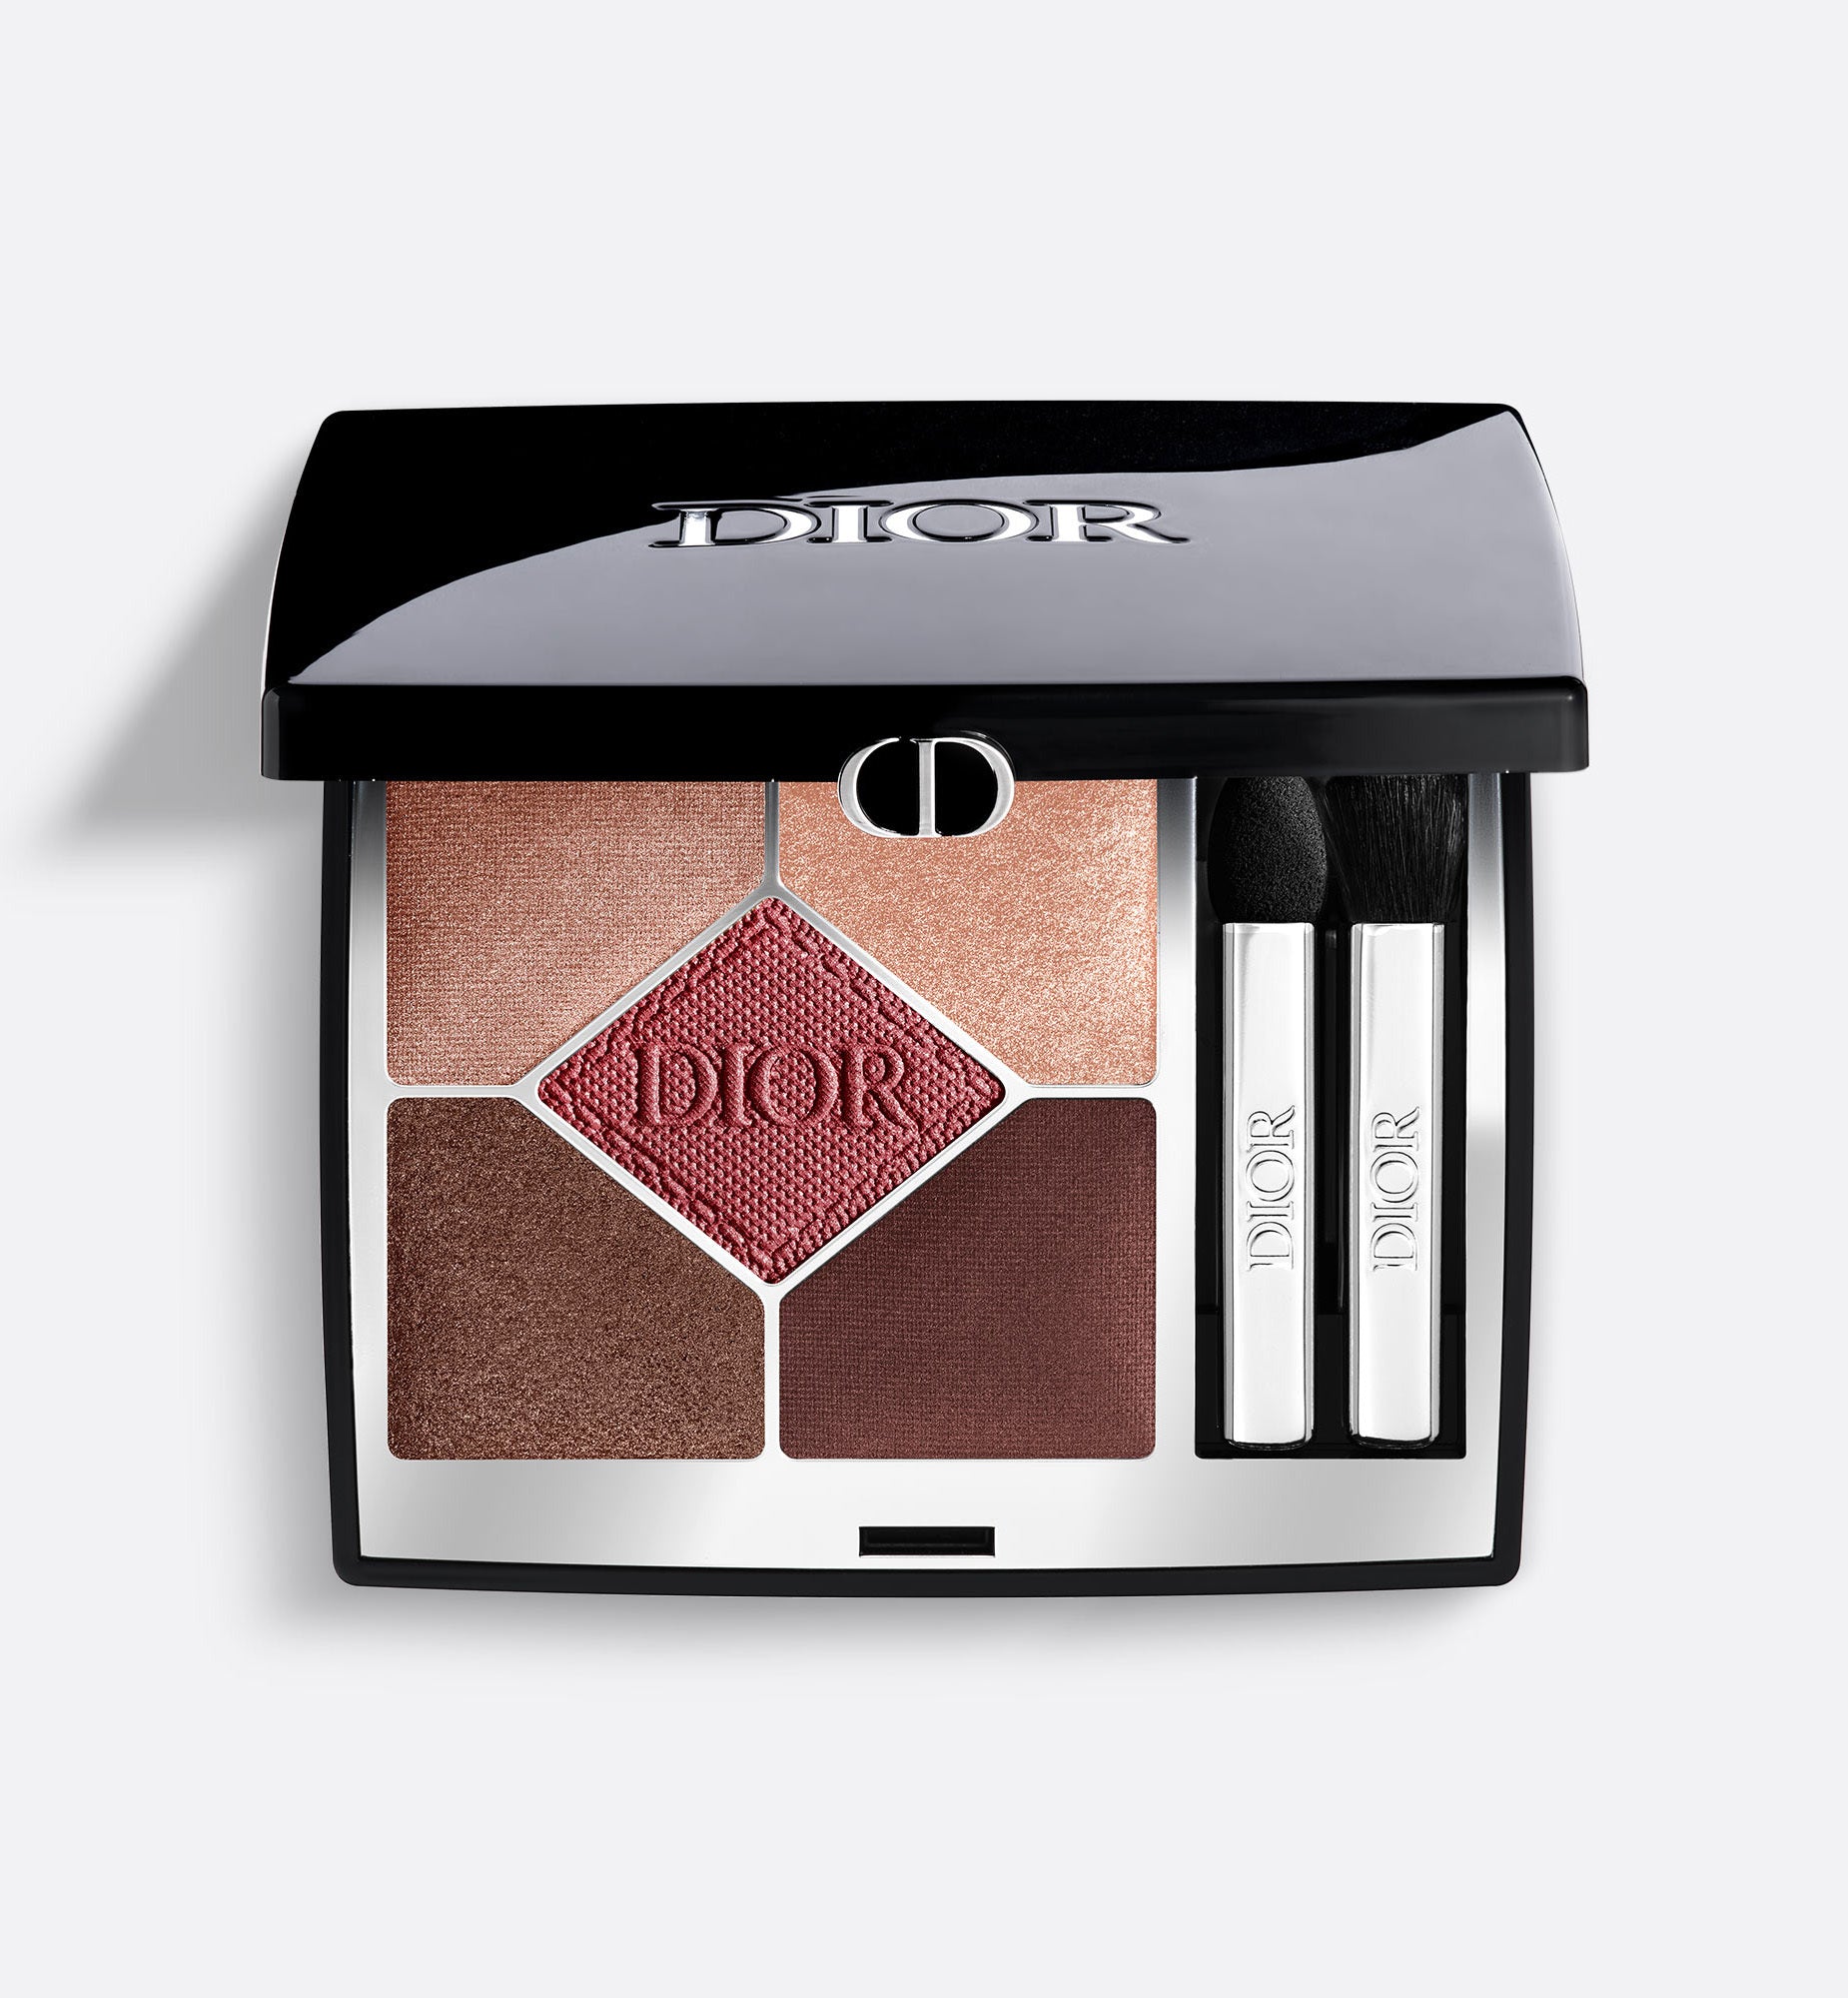 Diorshow 5 Couleurs | Eye Palette - 5 Eyeshadows - High Color and Long Wear